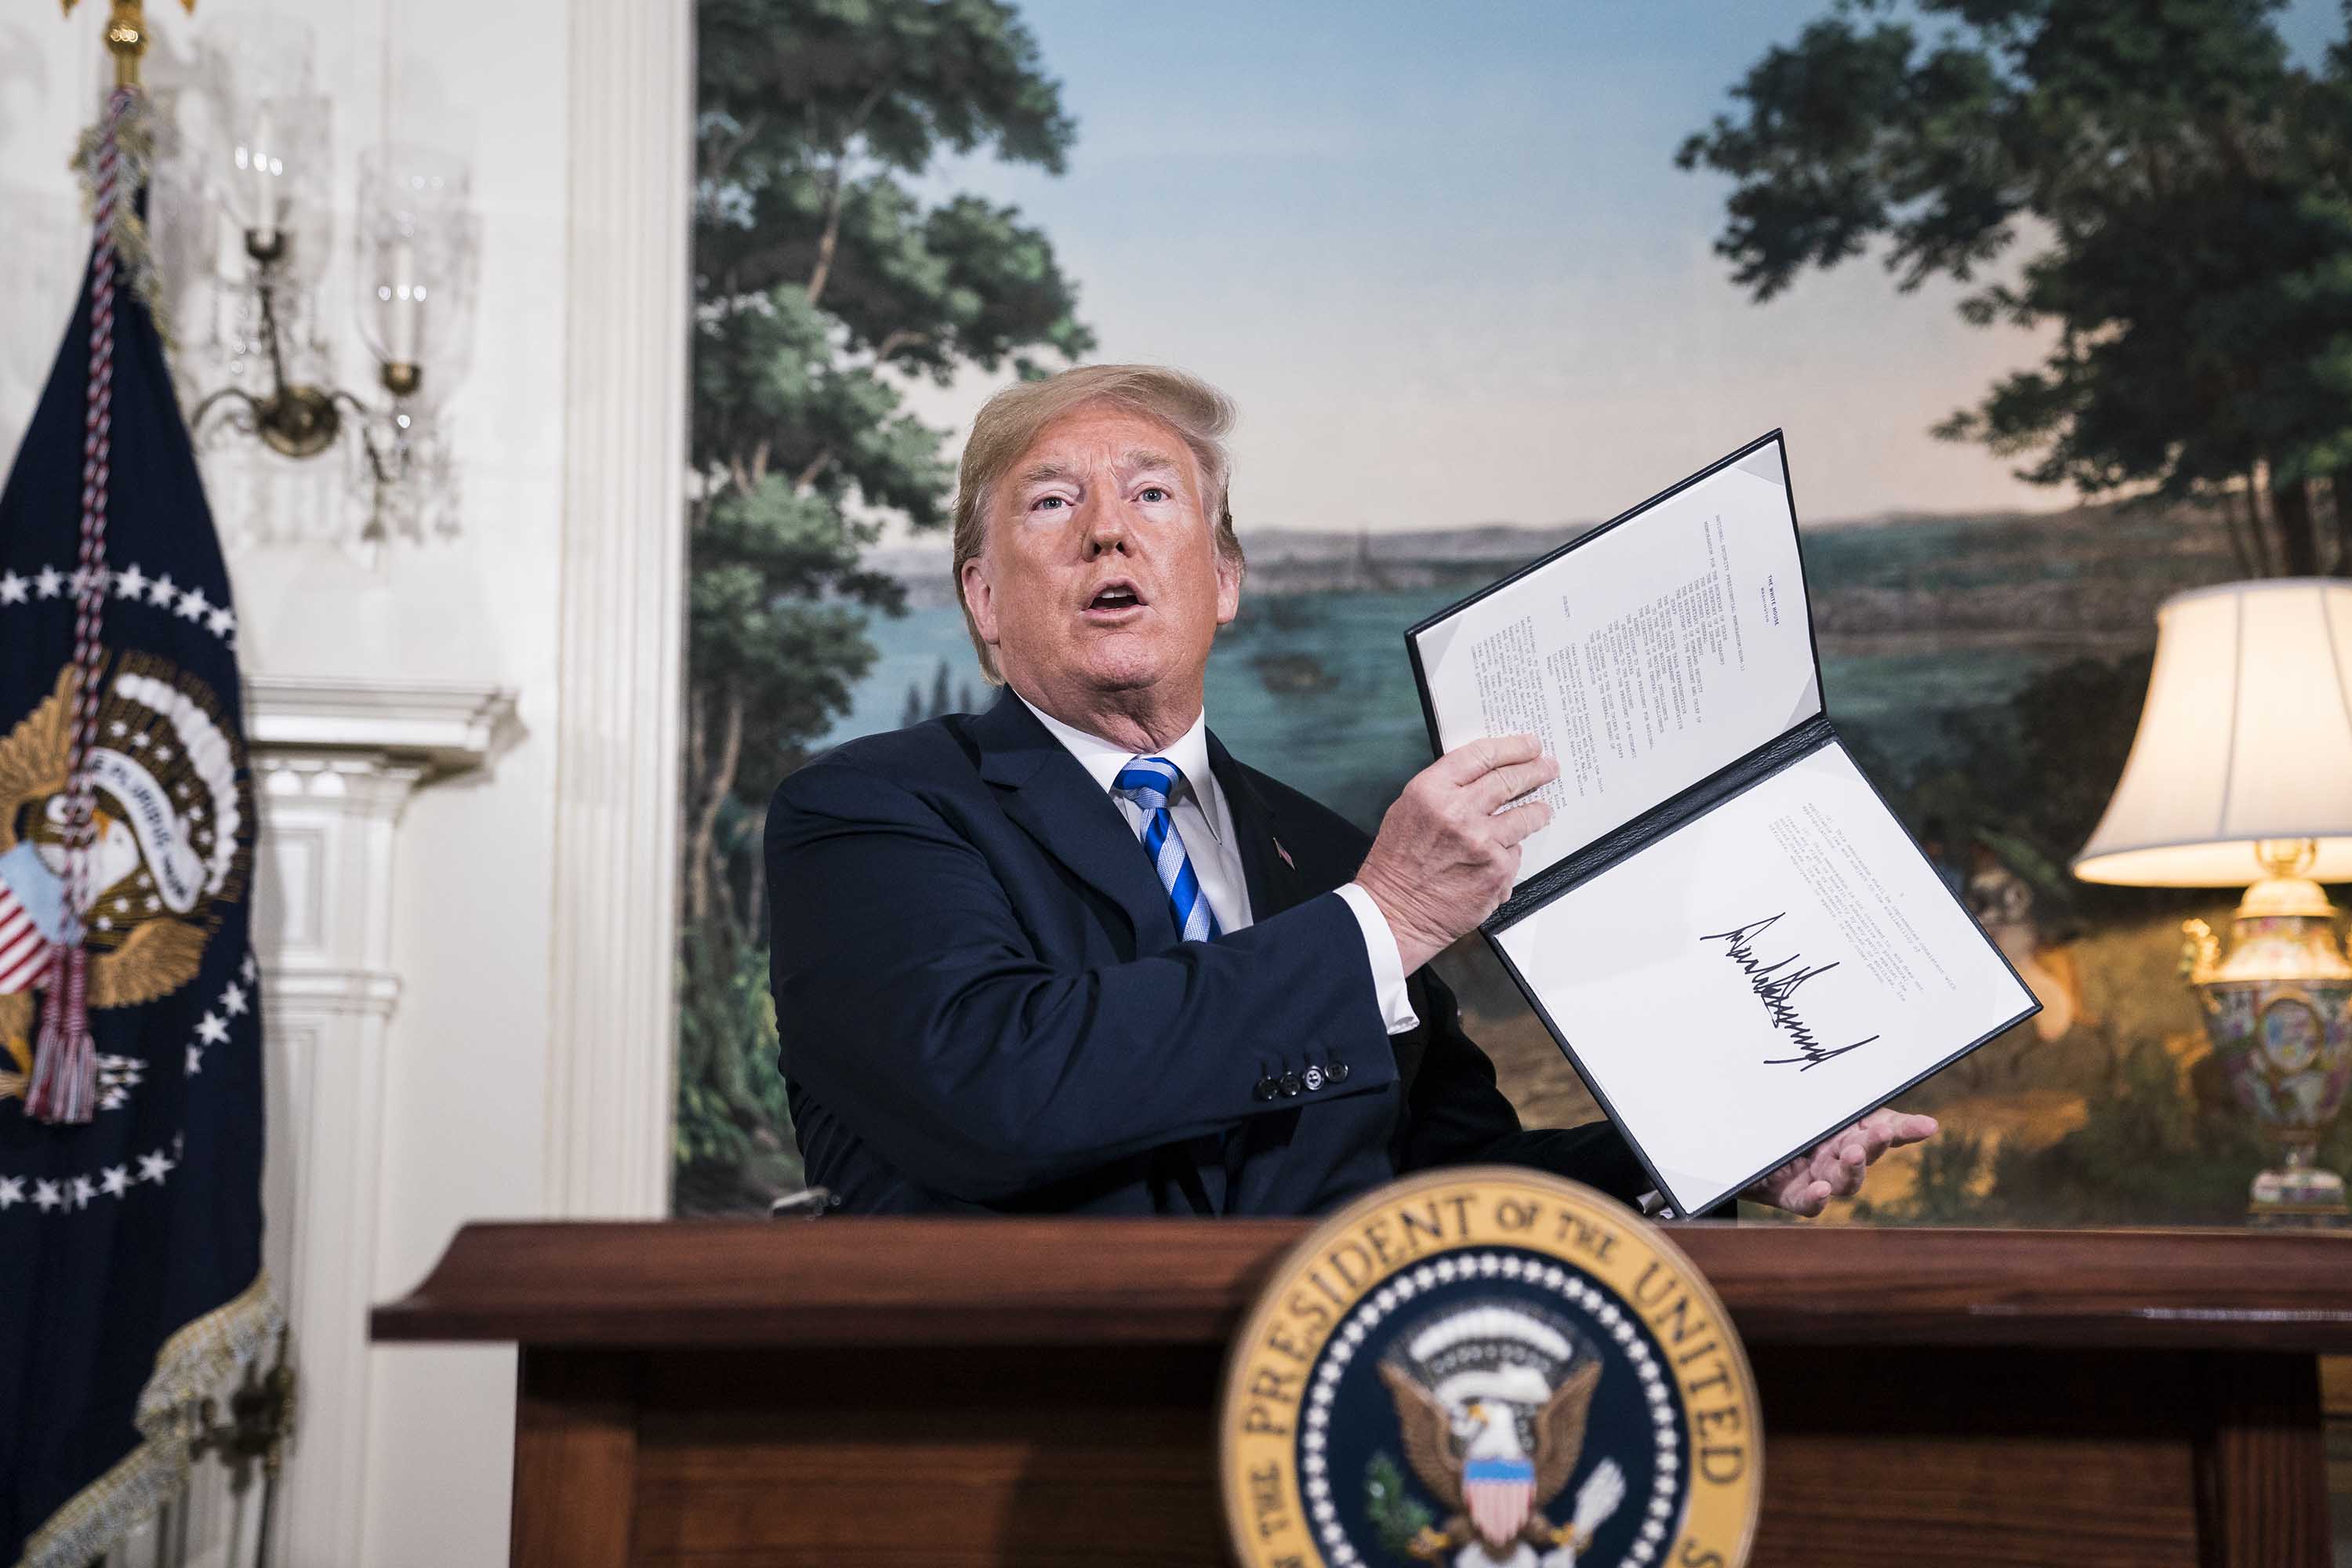 President Trump signs a National Security Presidential Memorandum as he announces the withdrawal of the US from the Iran nuclear deal during a "Joint Comprehensive Plan of Action" event at the White House in May 2018. Credit: Jabin Botsford/The Washington Post via Getty Images